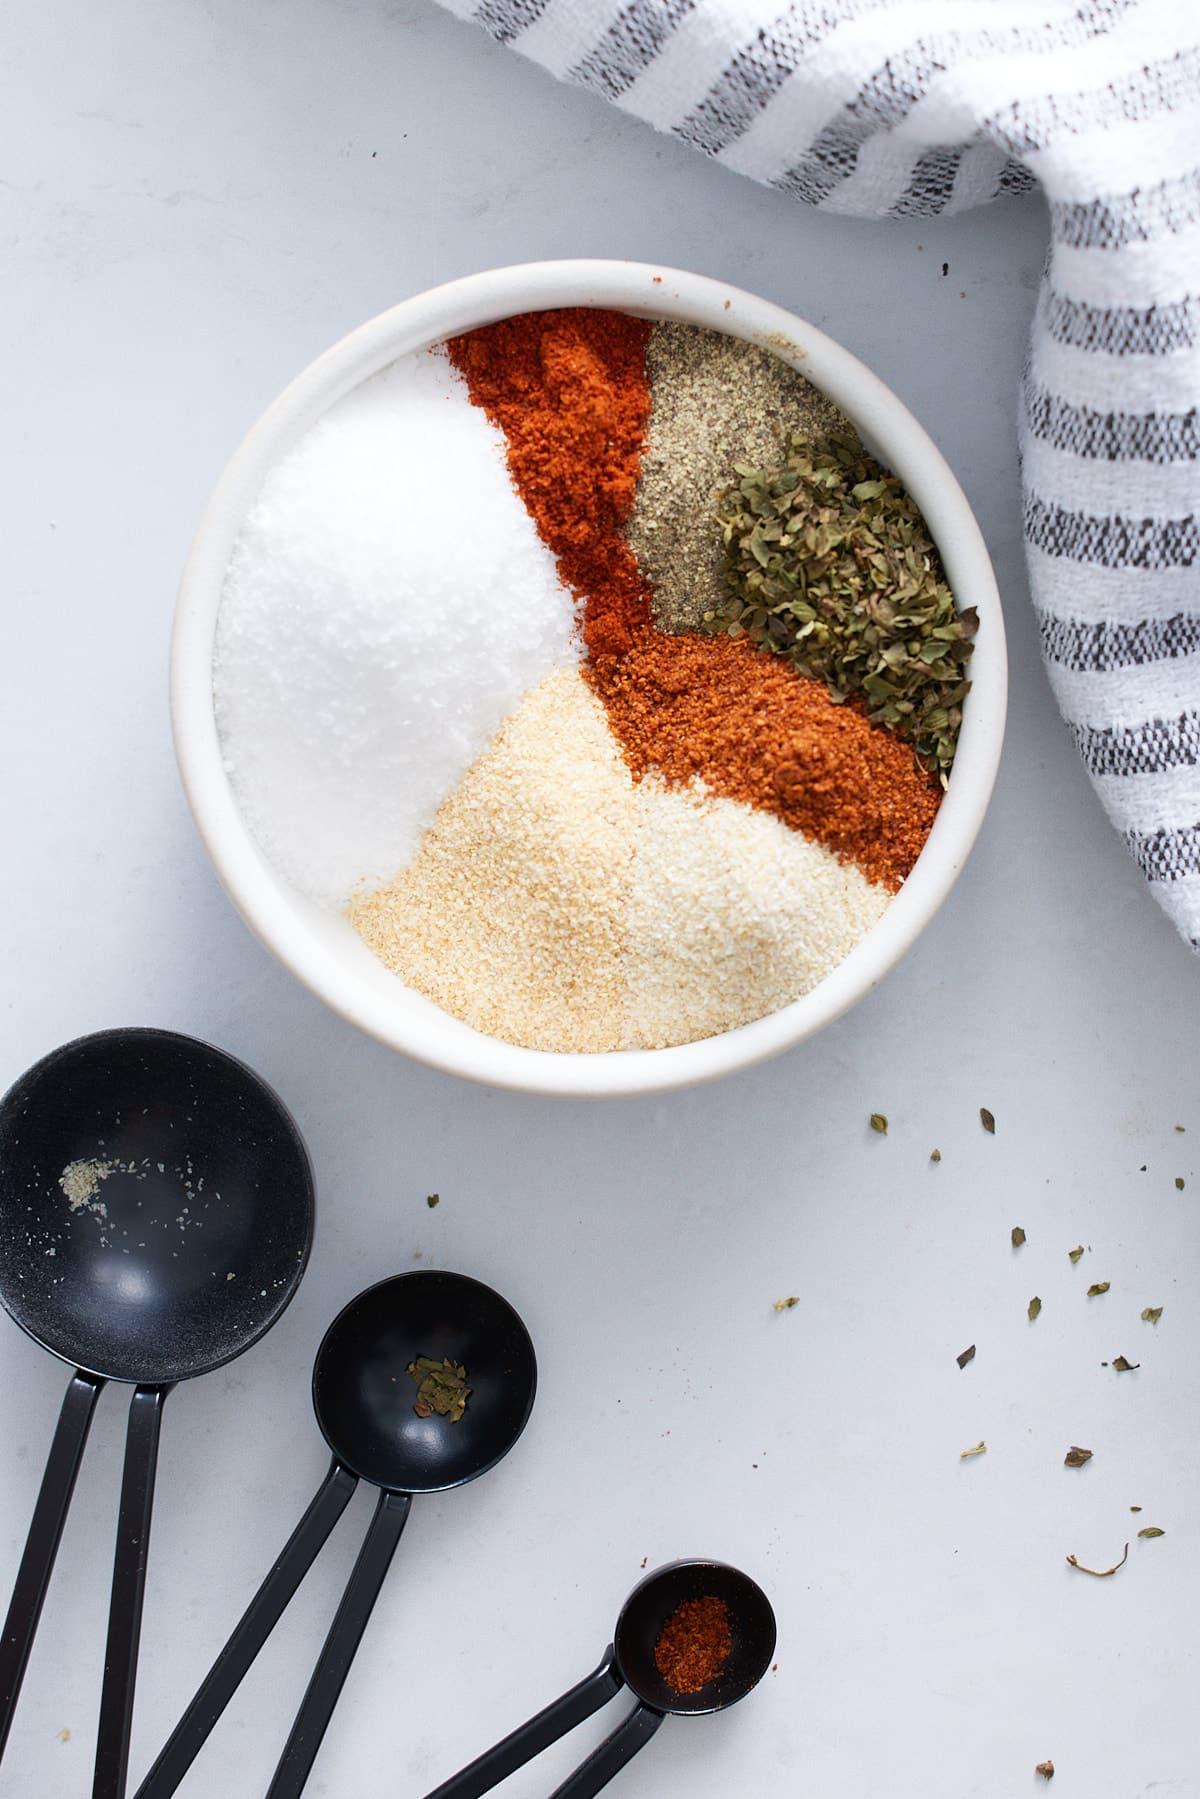 seasonings in white bowl with measuring spoons next to it